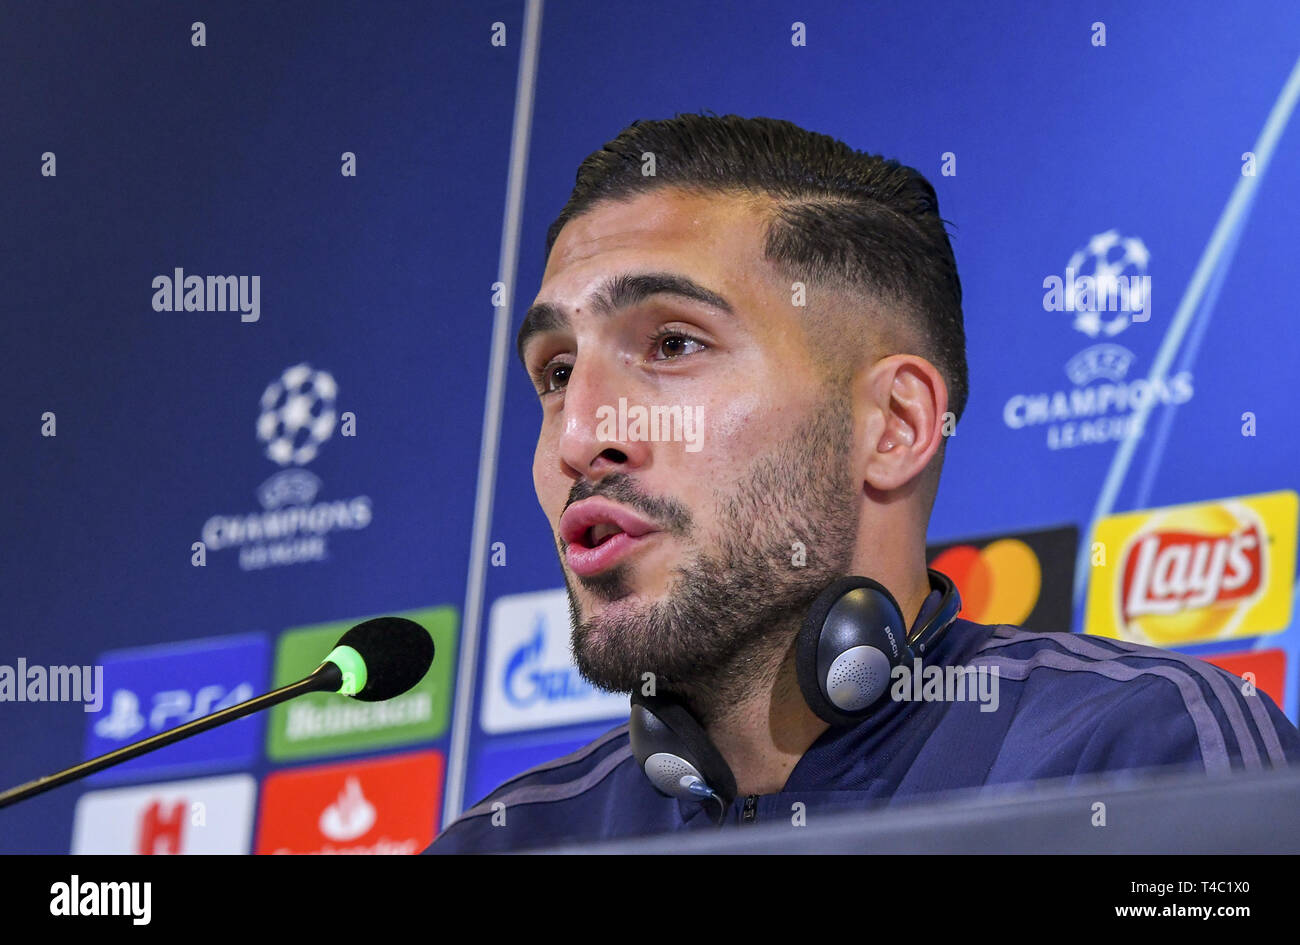 Turin, Italy. 15th Apr, 2019. Football: Champions League, Before the quarter-finals, Juventus Turin - Ajax Amsterdam, Press conference. Emre Can of Juventus speaks at the press conference. Credit: Antonio Polia/dpa/Alamy Live News Stock Photo